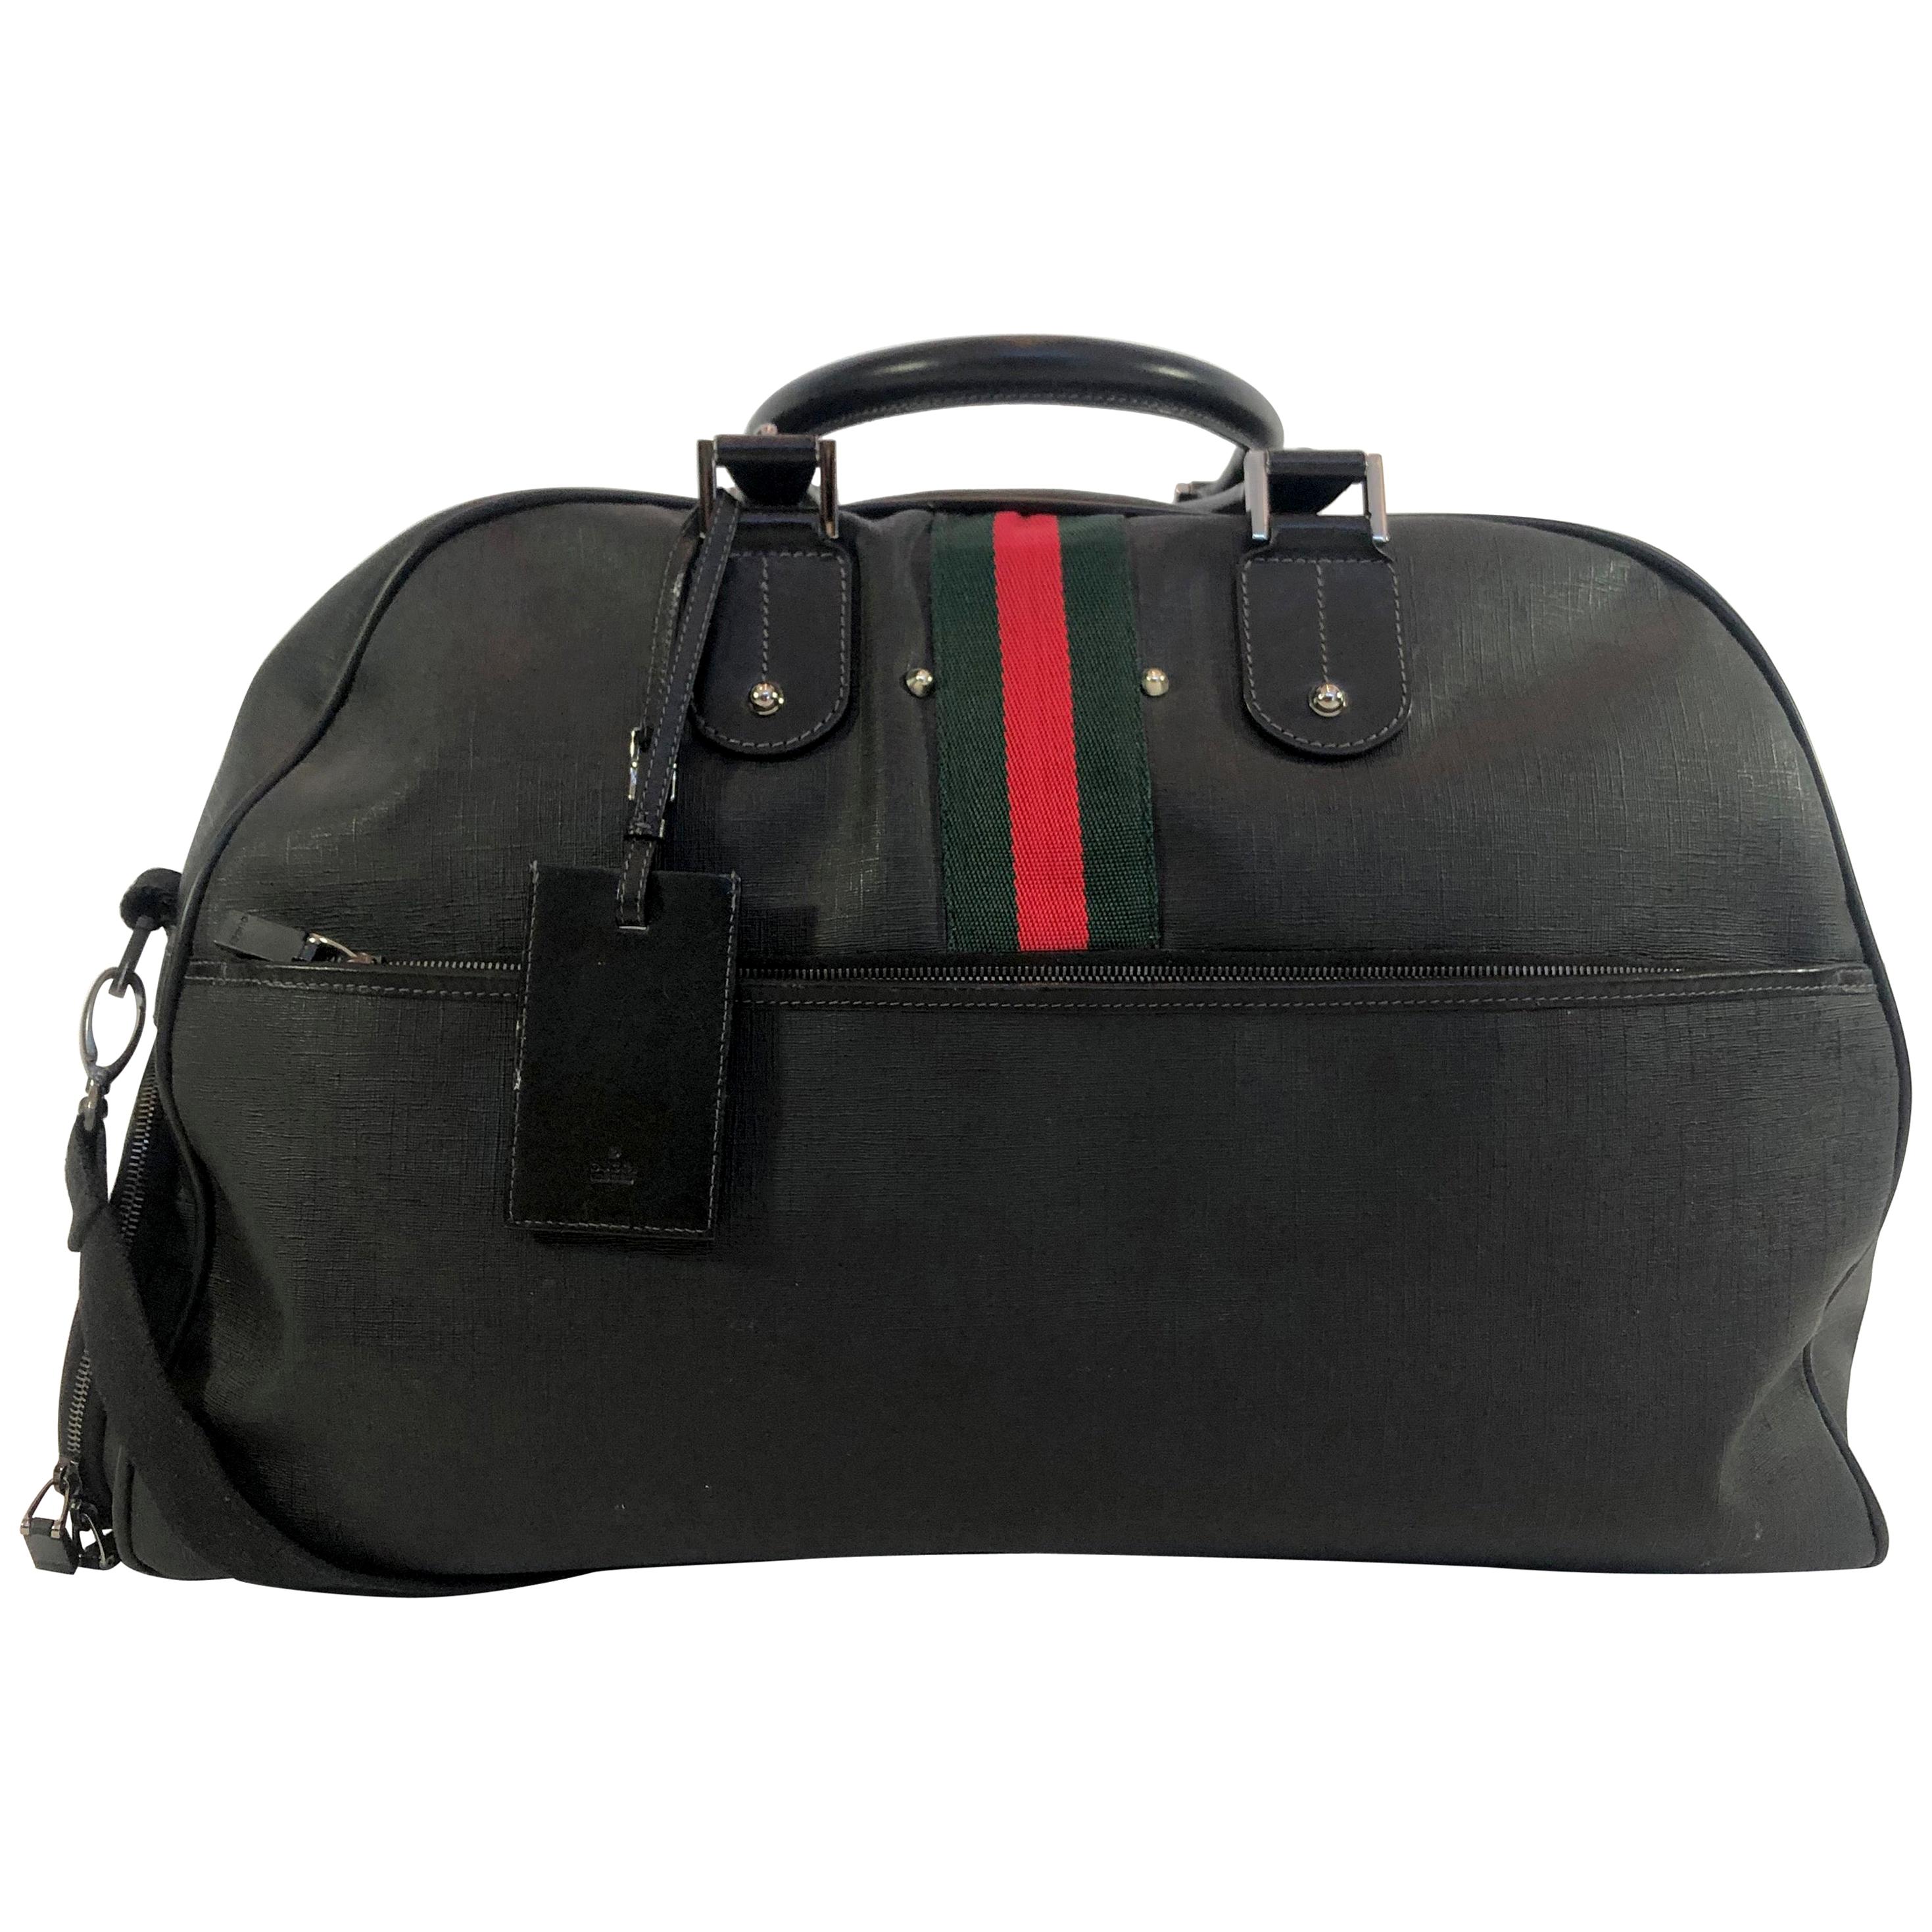 Gucci Black Leather Weekender Suitcase with Classic Green and Red Stripe  For Sale